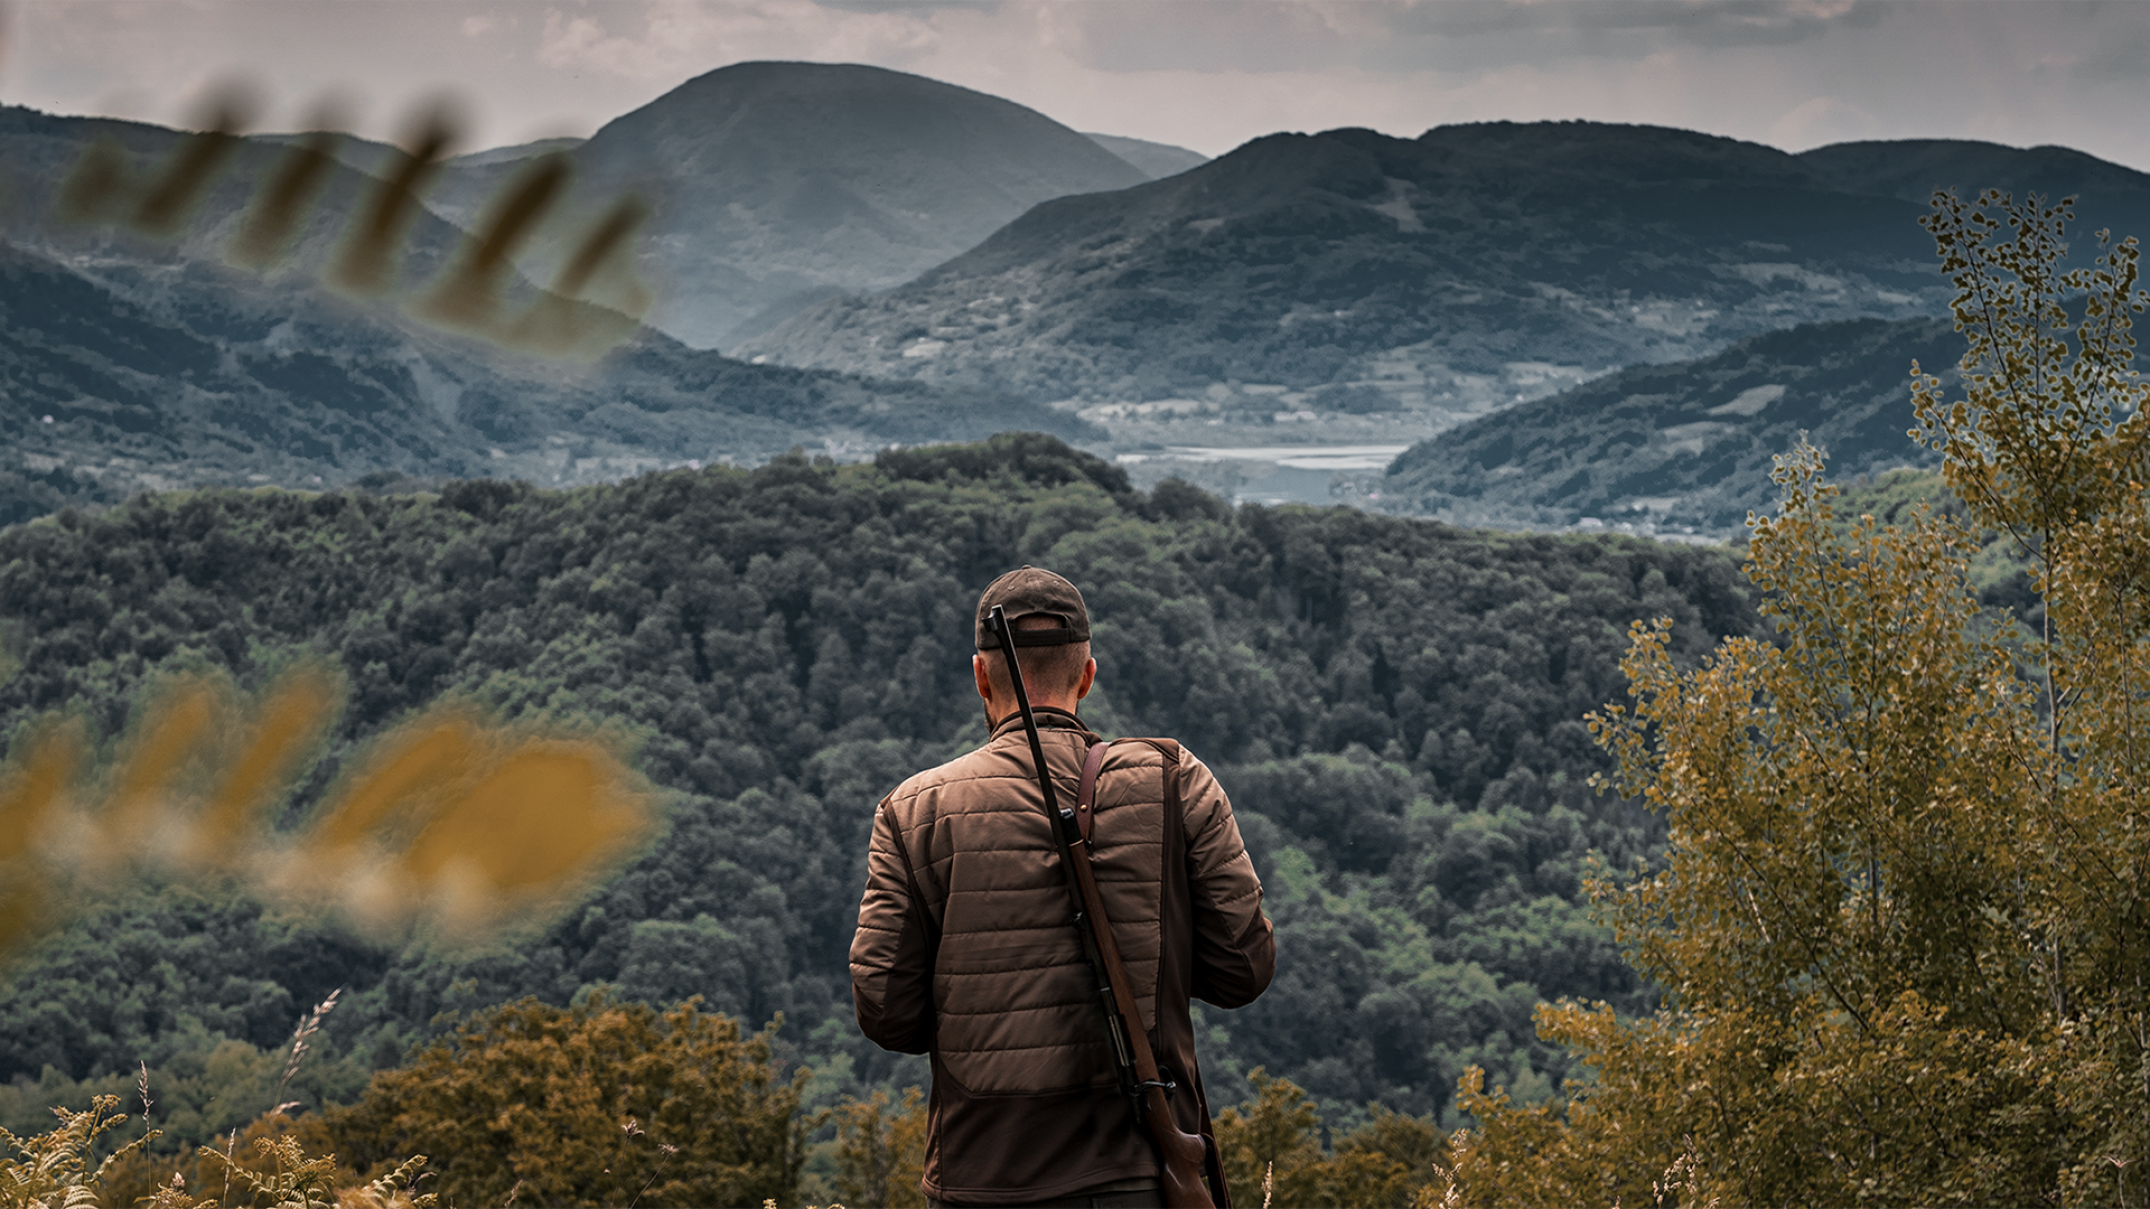 Hunting traditions in European countries